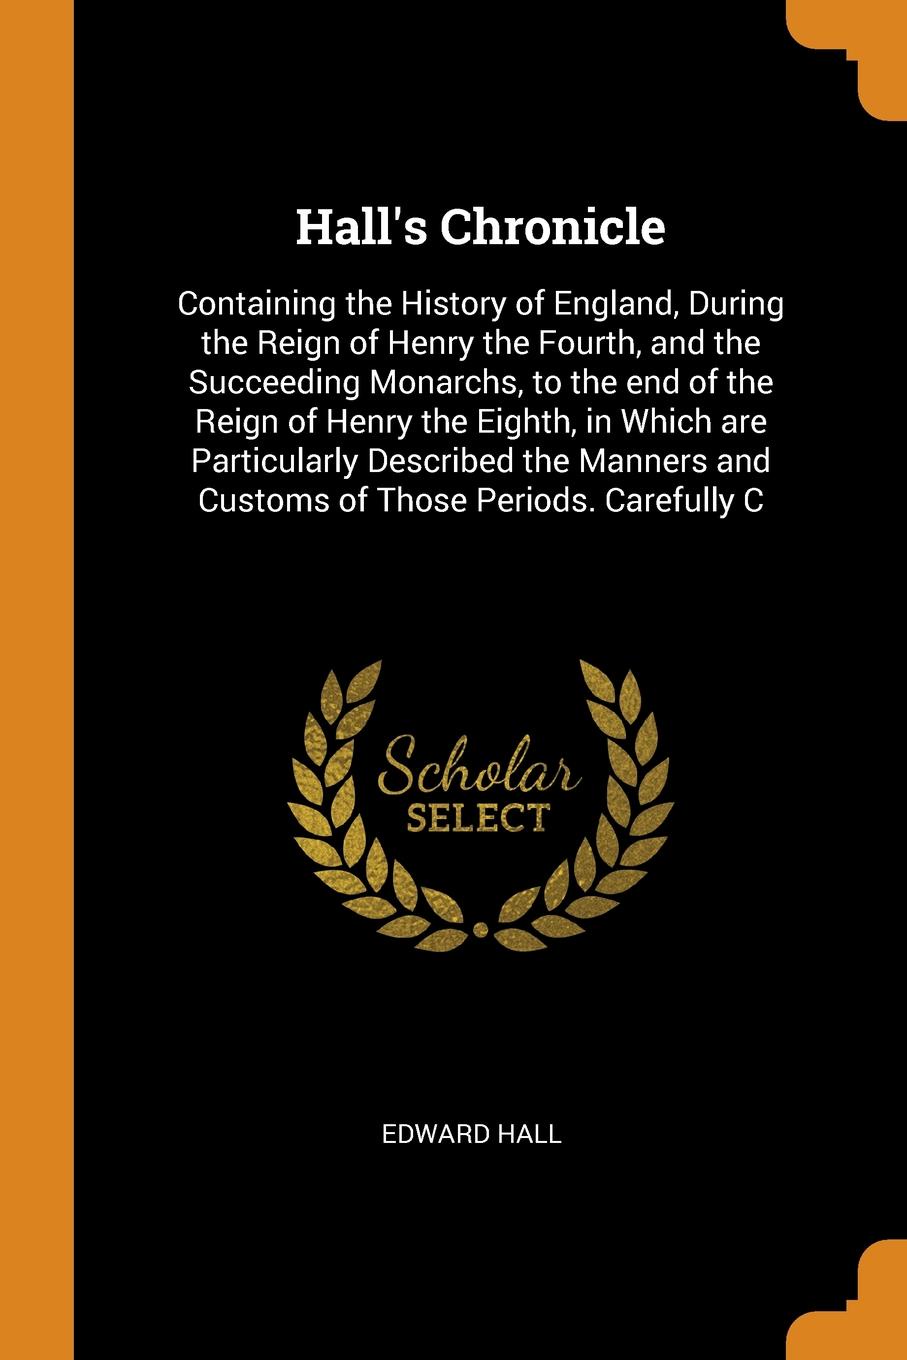 Hall`s Chronicle. Containing the History of England, During the Reign of Henry the Fourth, and the Succeeding Monarchs, to the end of the Reign of Henry the Eighth, in Which are Particularly Described the Manners and Customs of Those Periods. Care...